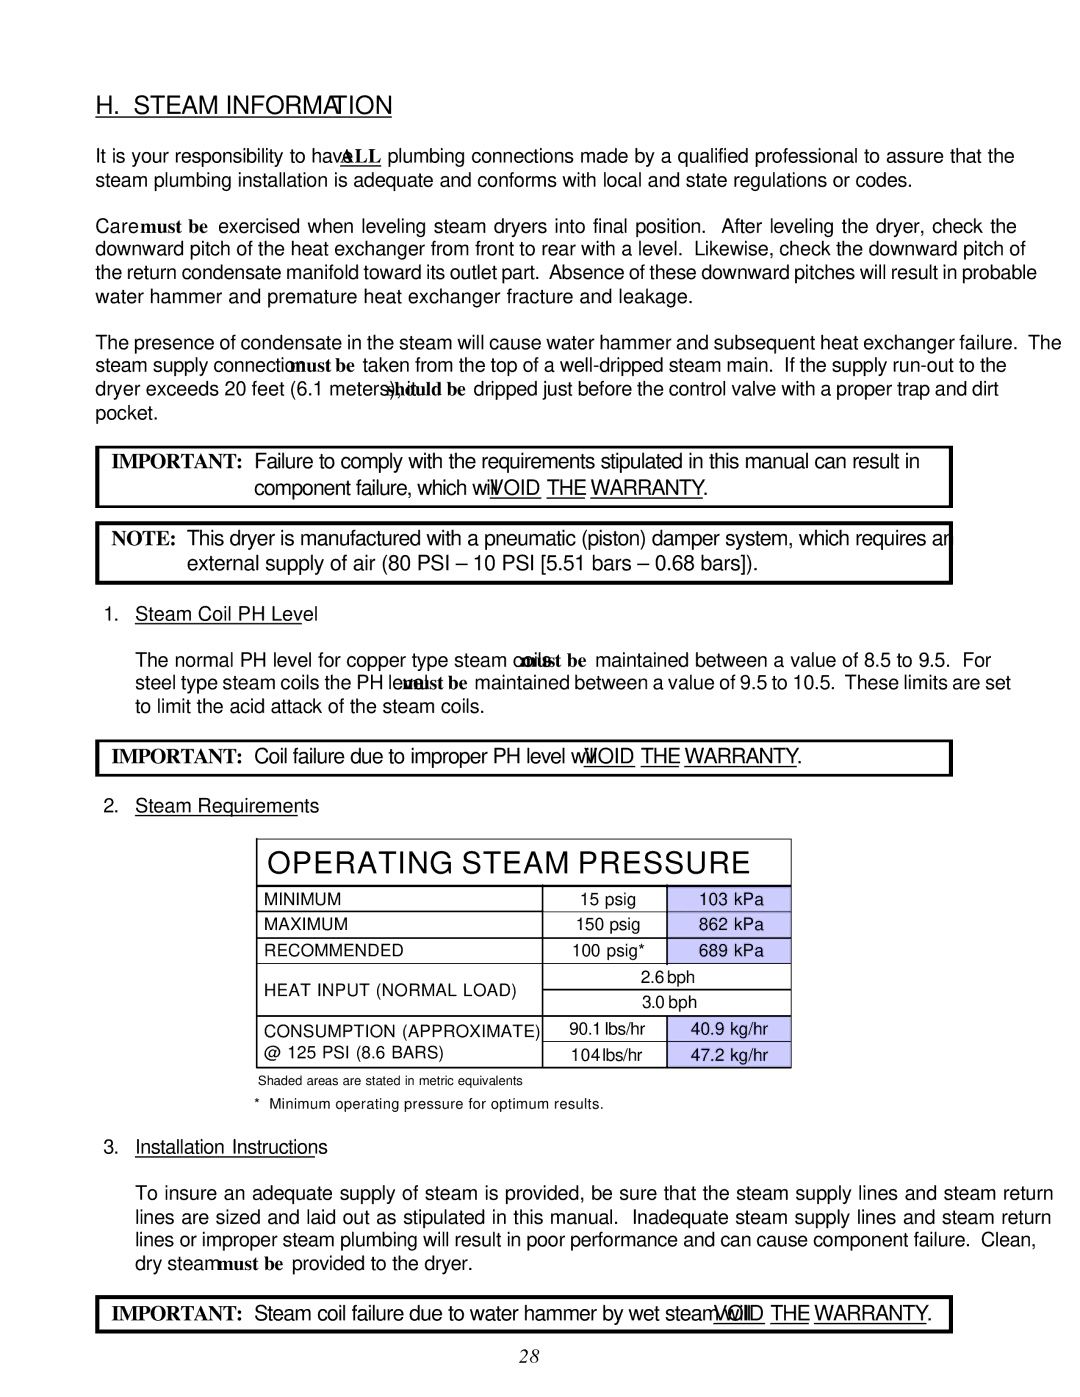 American Dryer Corp D-40 installation manual Operating Steam Pressure, Steam Information 